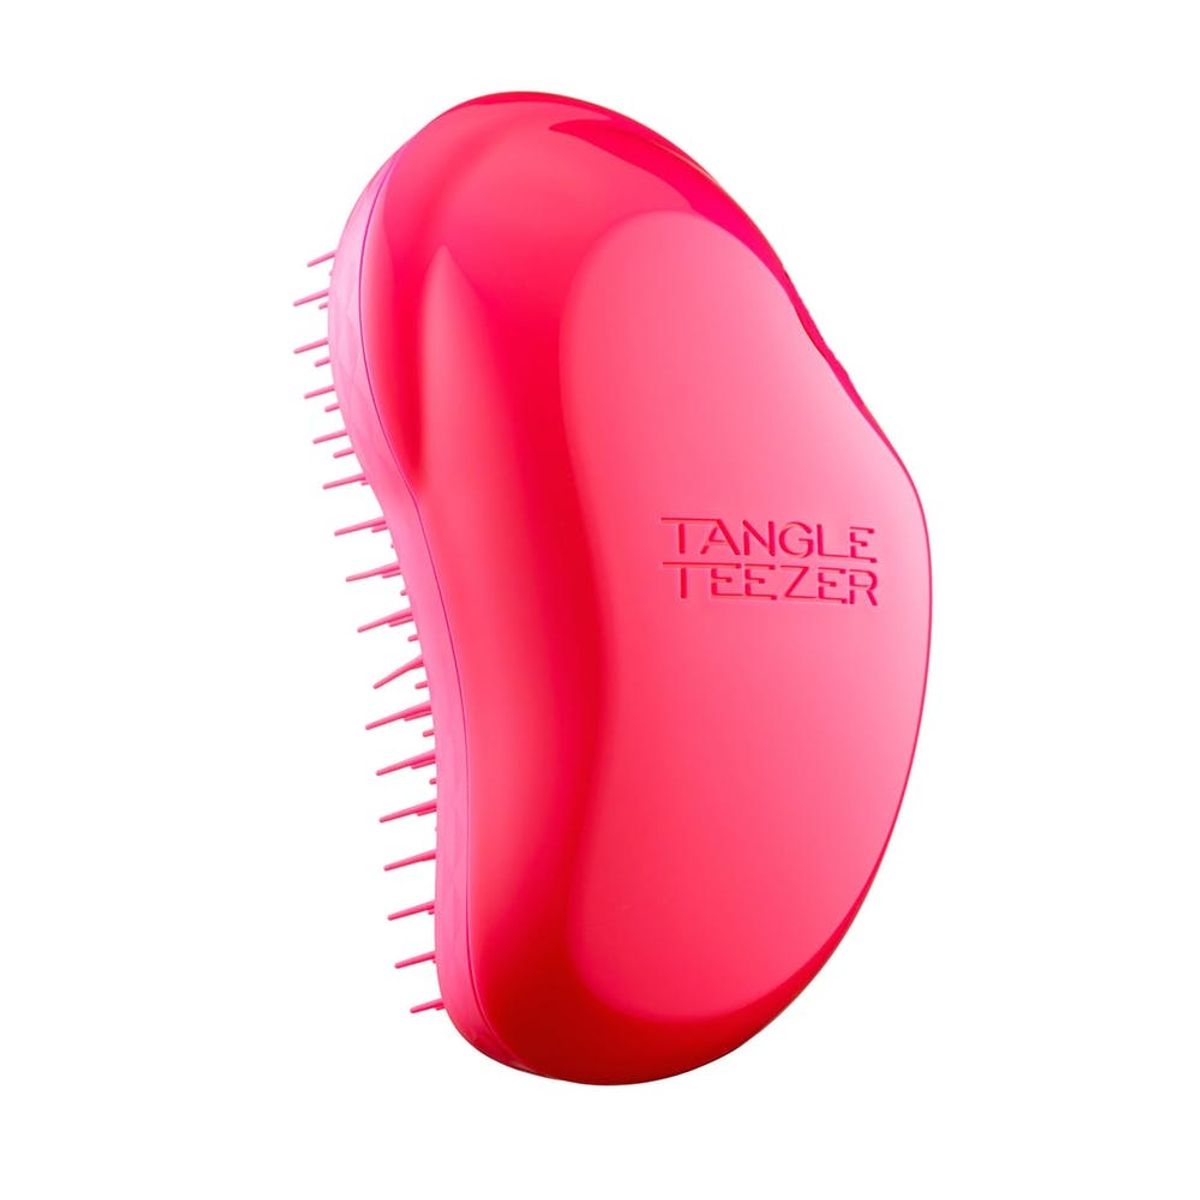 The 9 Best Hairbrushes to Banish Frizz